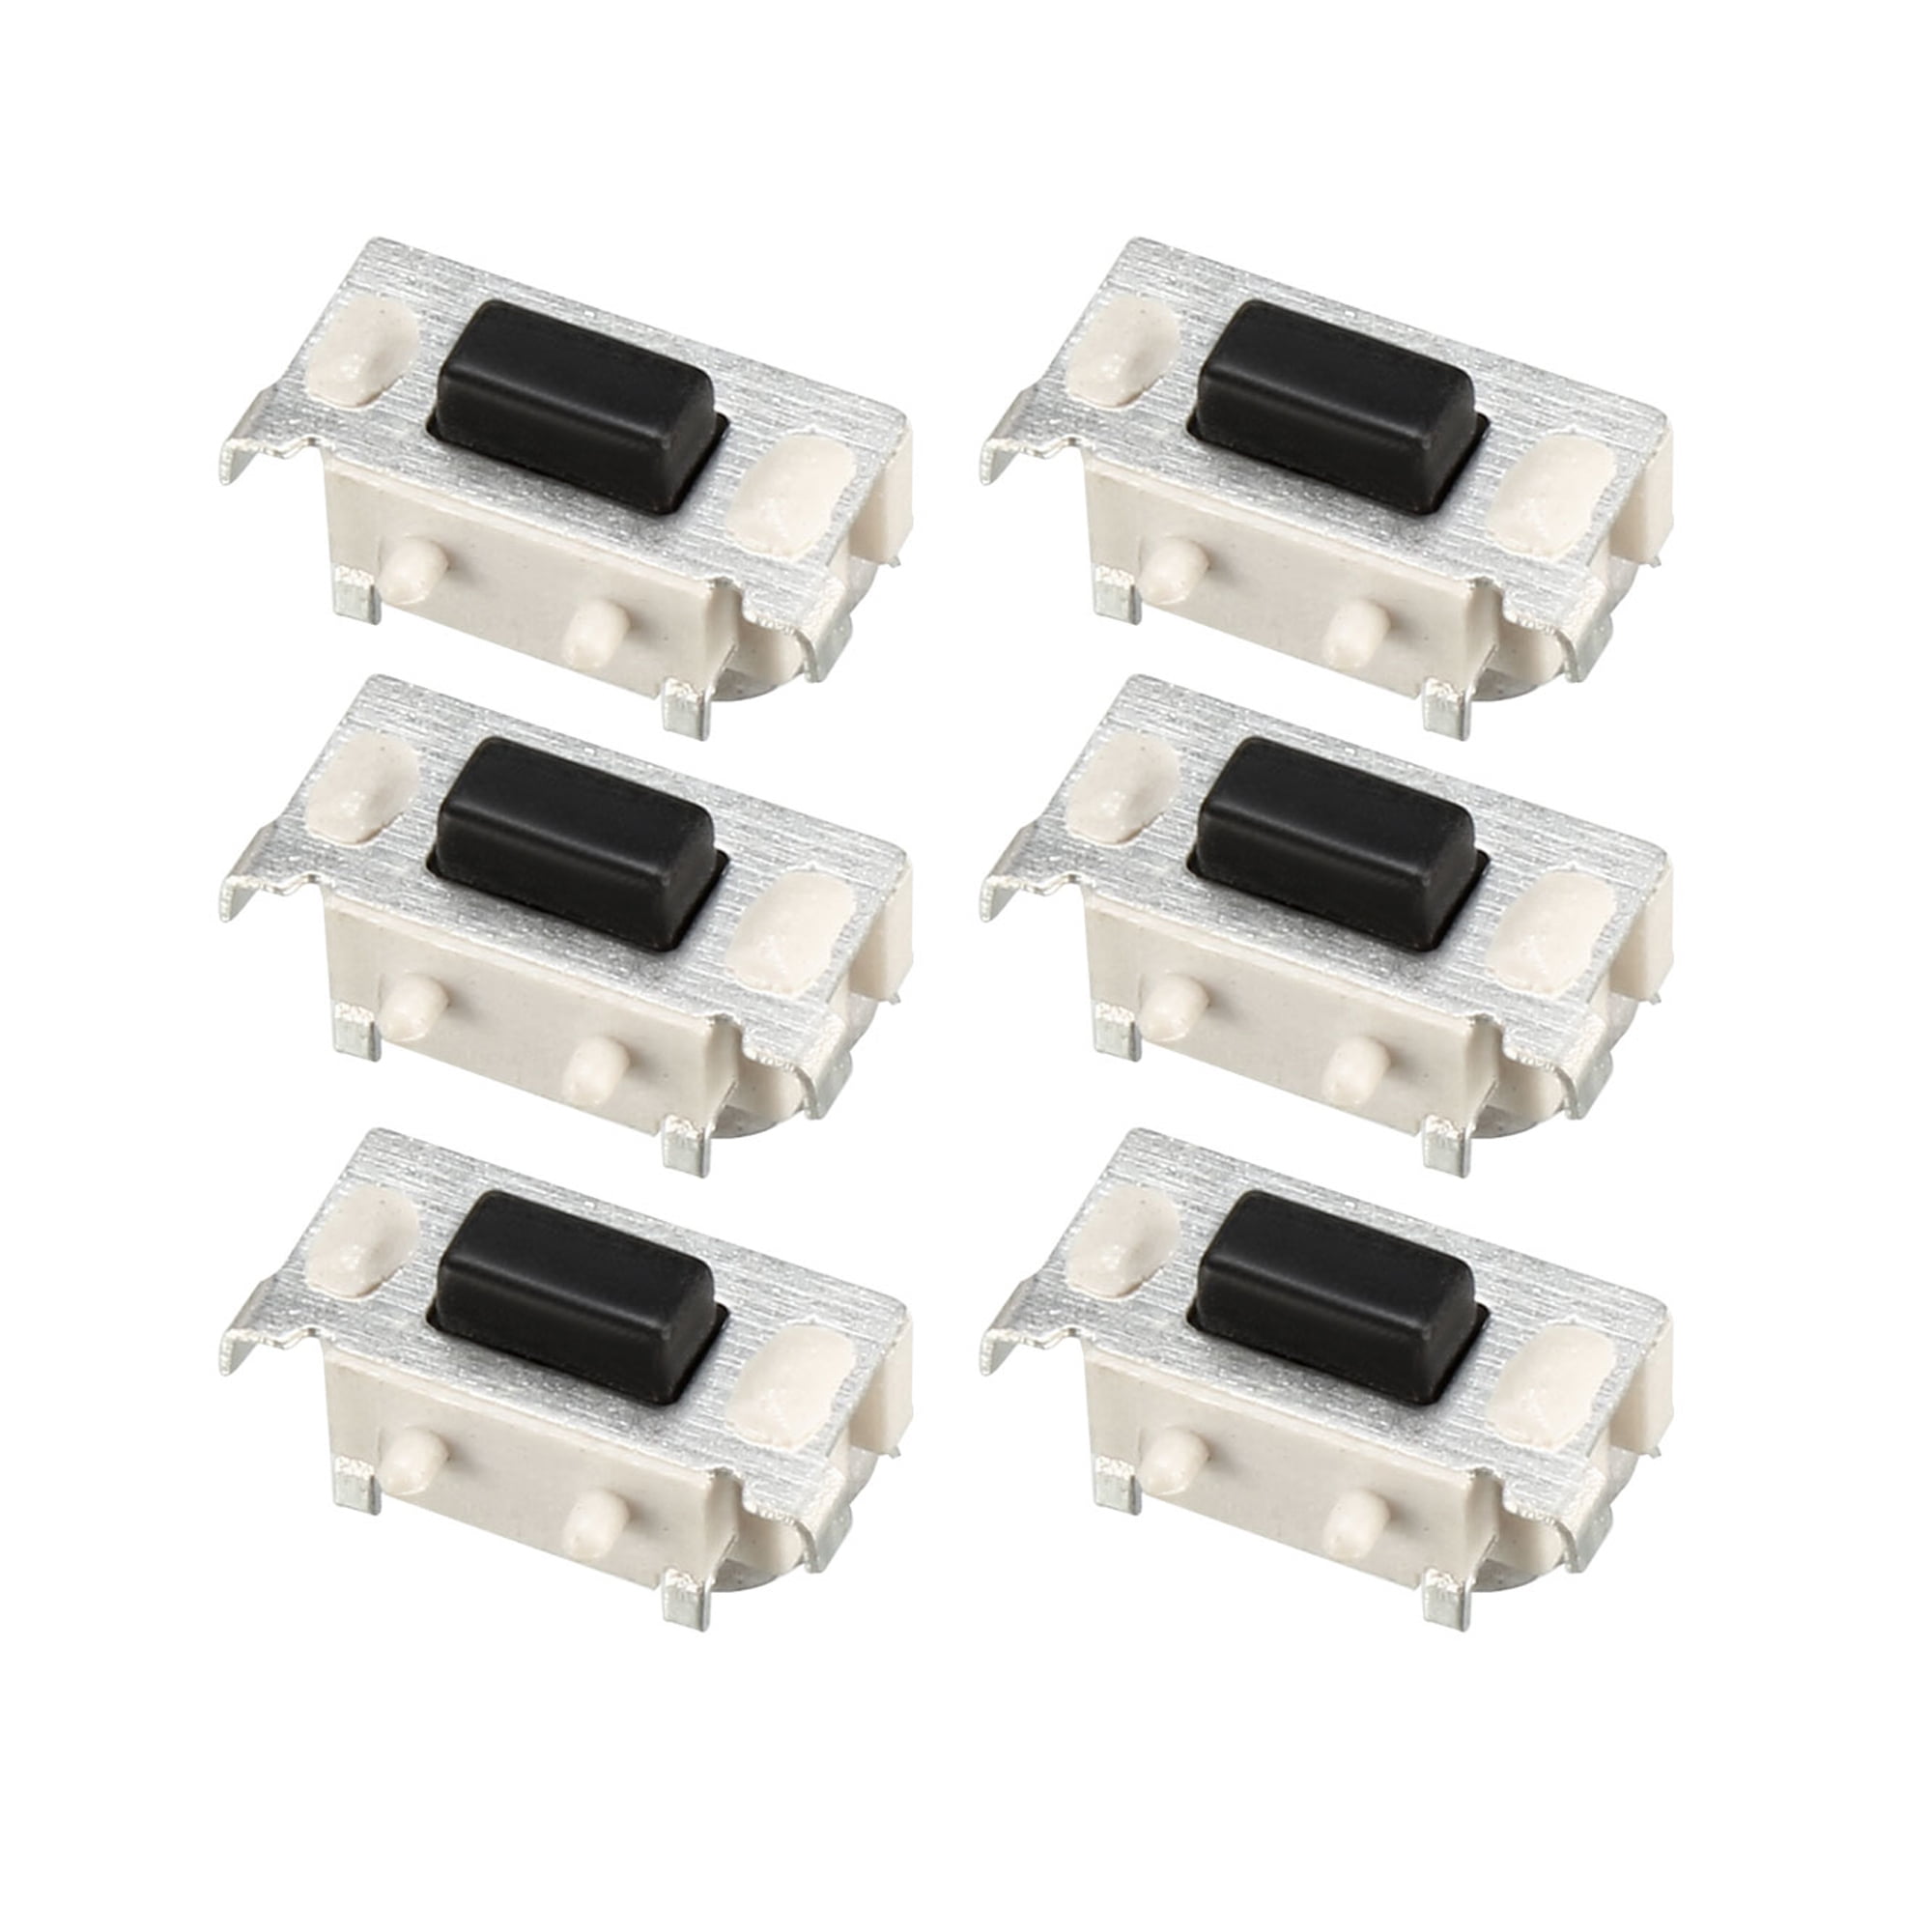 uxcell 10 Pcs 6 Pin PCB Light Touch Locking Latching Push Button Tact Tactile Switch 7 x 7 x 12mm